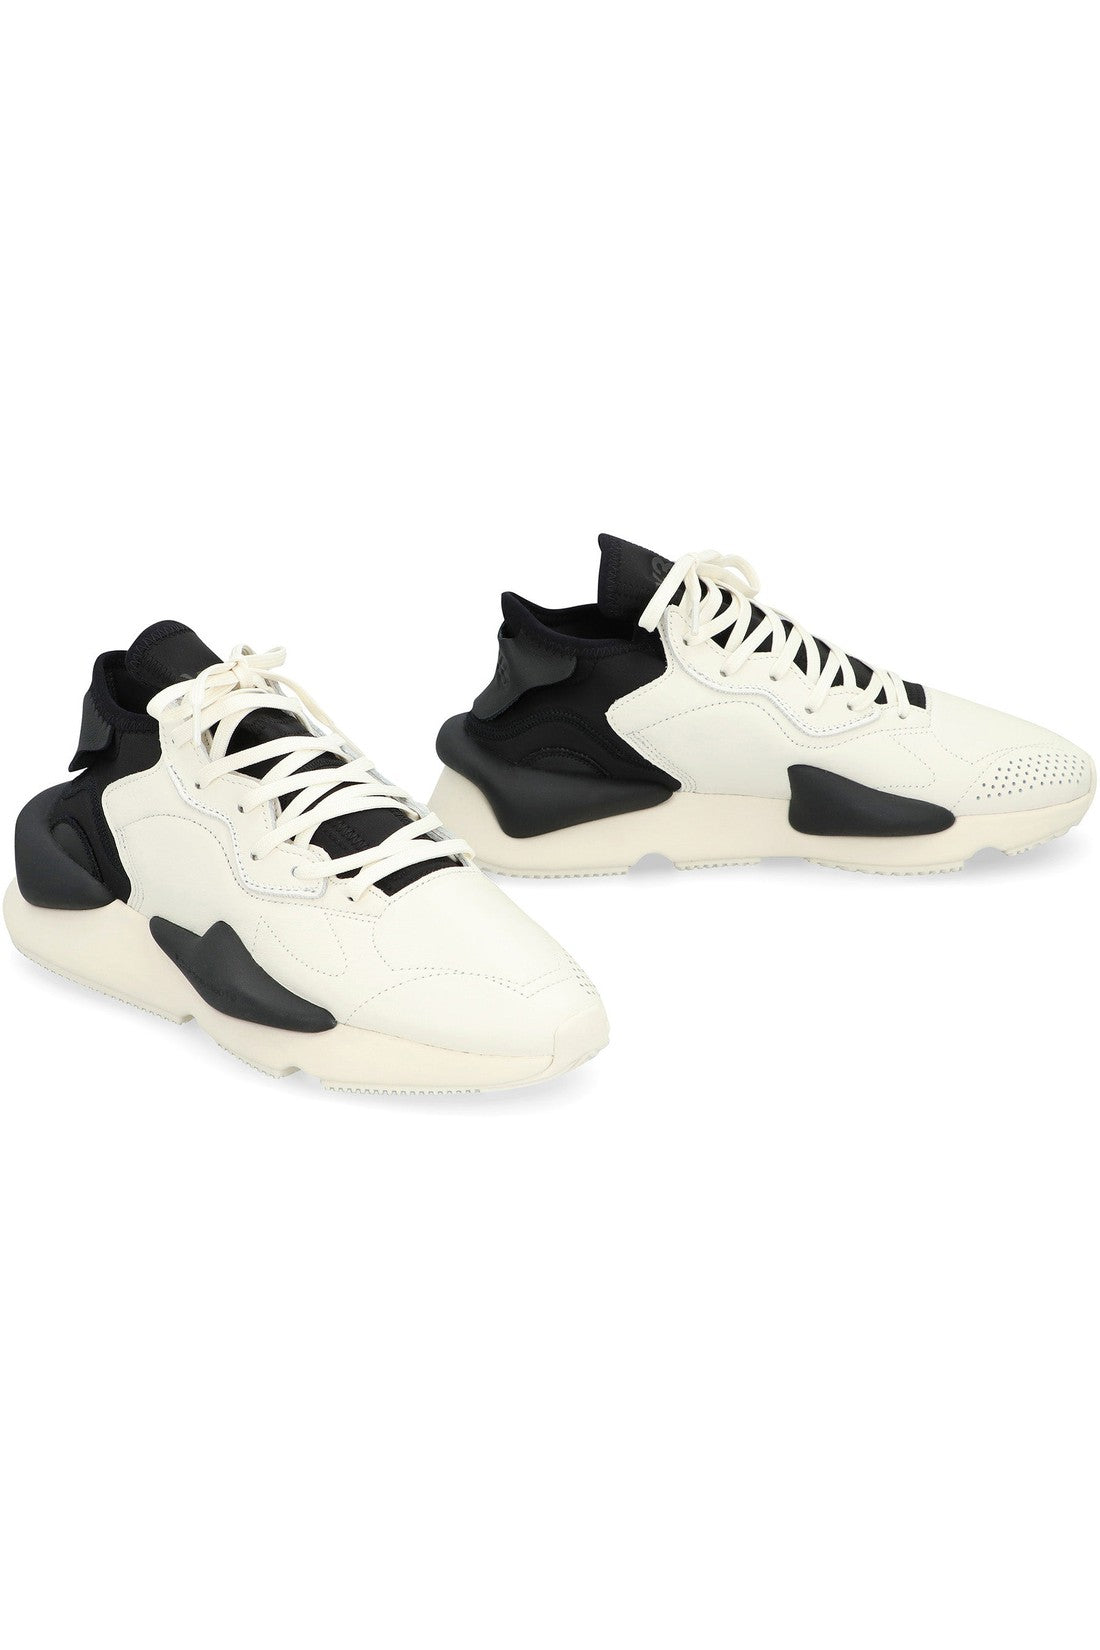 adidas Y-3-OUTLET-SALE-Kaiwa leather and fabric low-top sneakers-ARCHIVIST